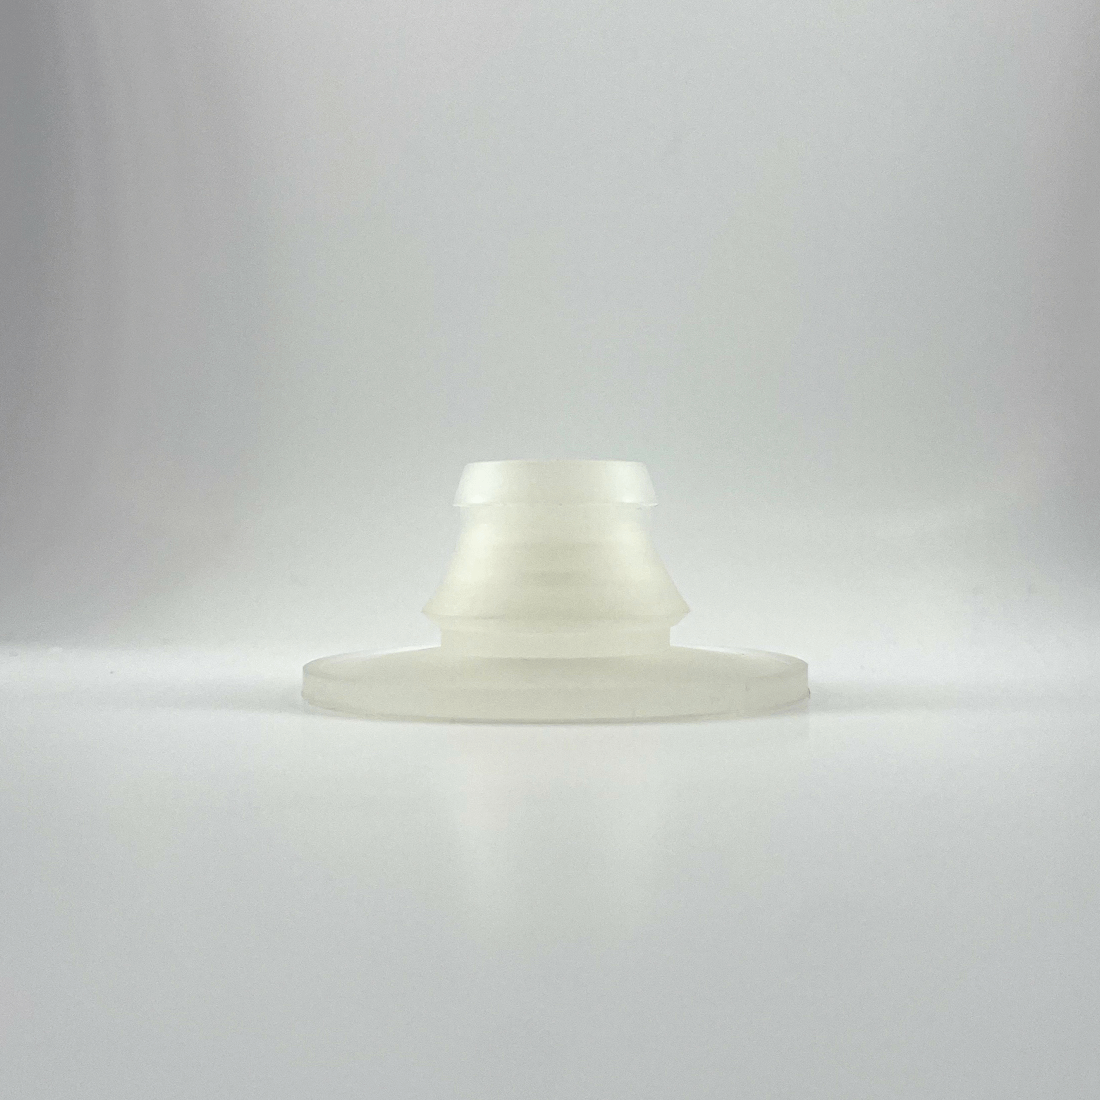 Extra Flow Nozzle made of pure silicone